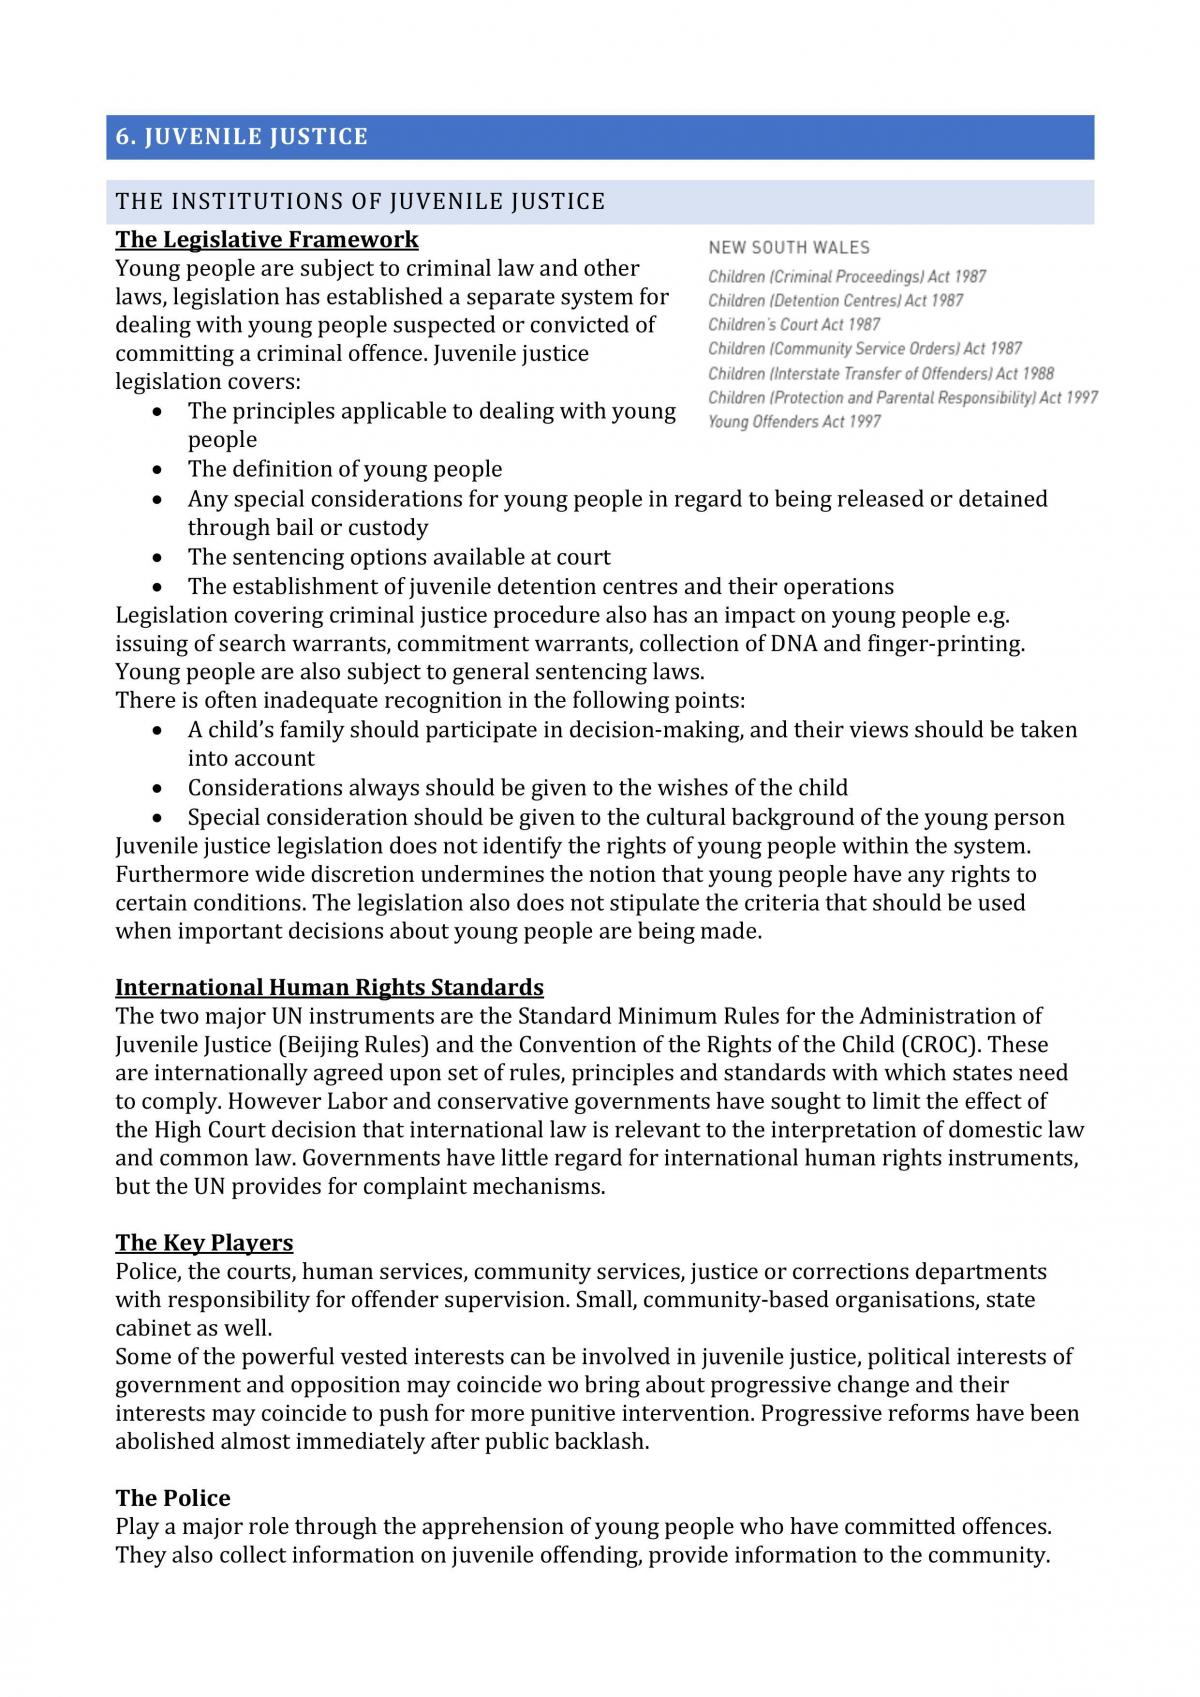 CRIM1011 Complete Notes - Page 40